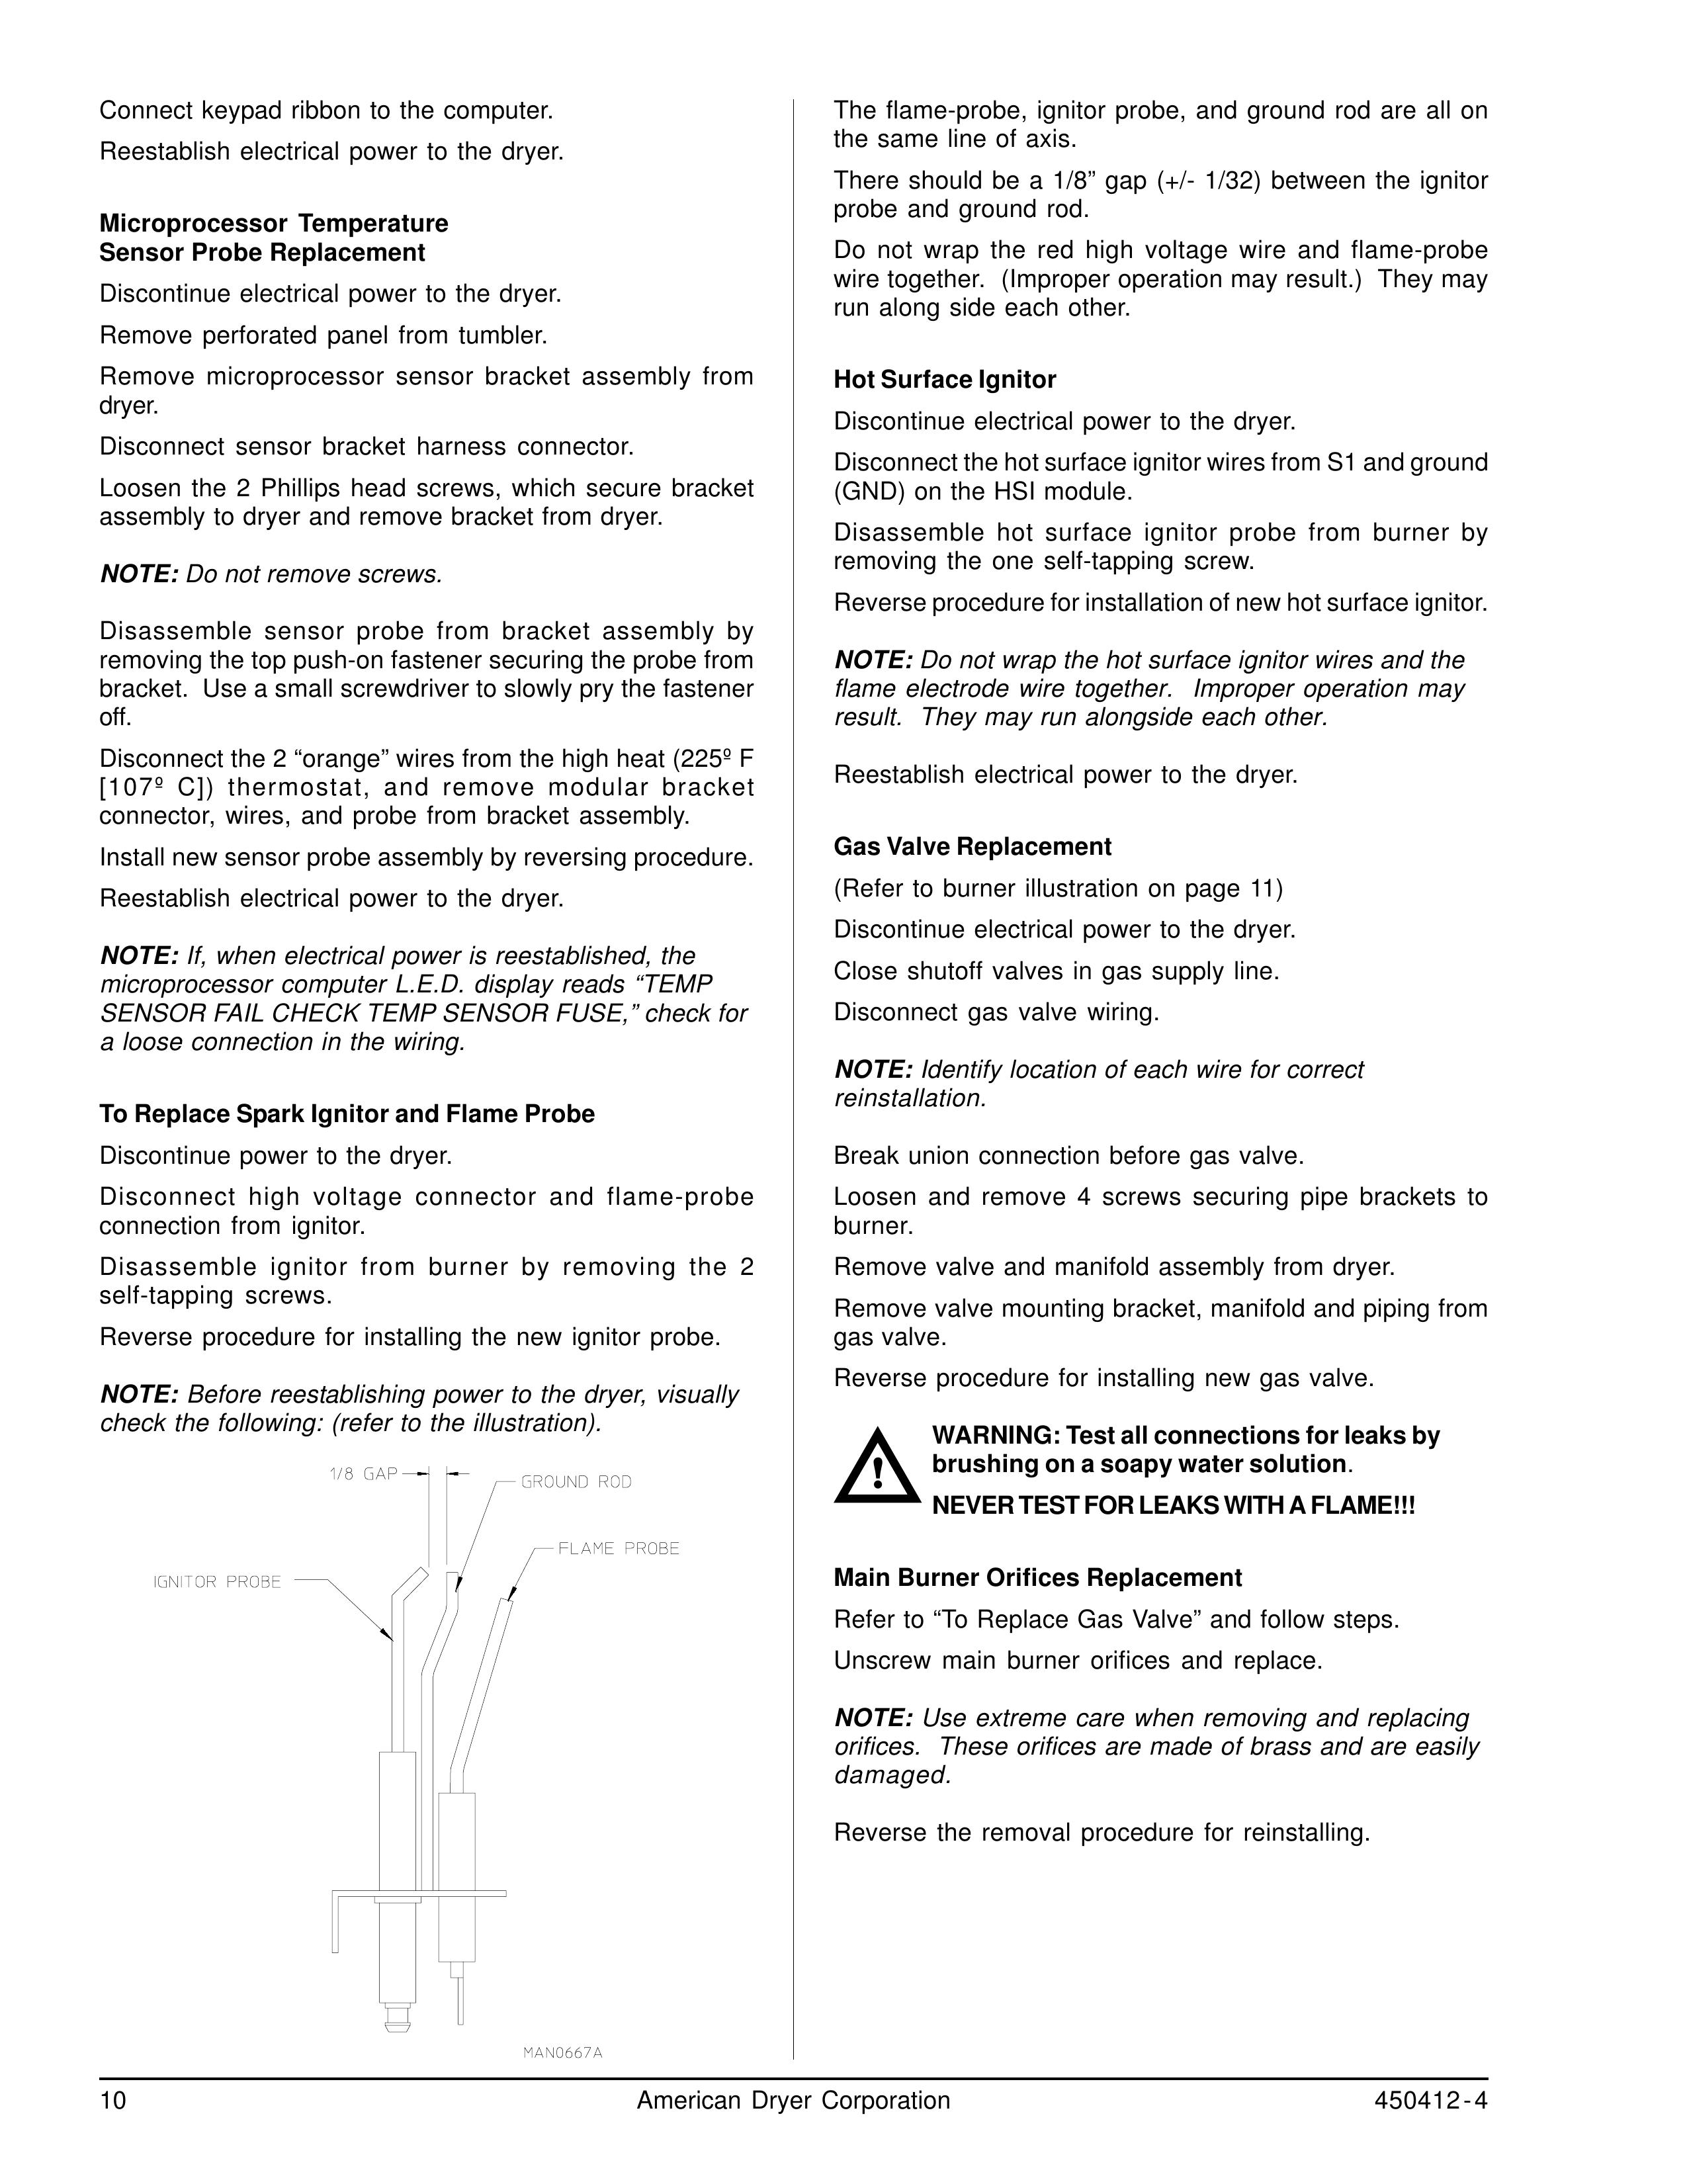 ADC ML-122 Clothes Dryer User Manual (Page 10)